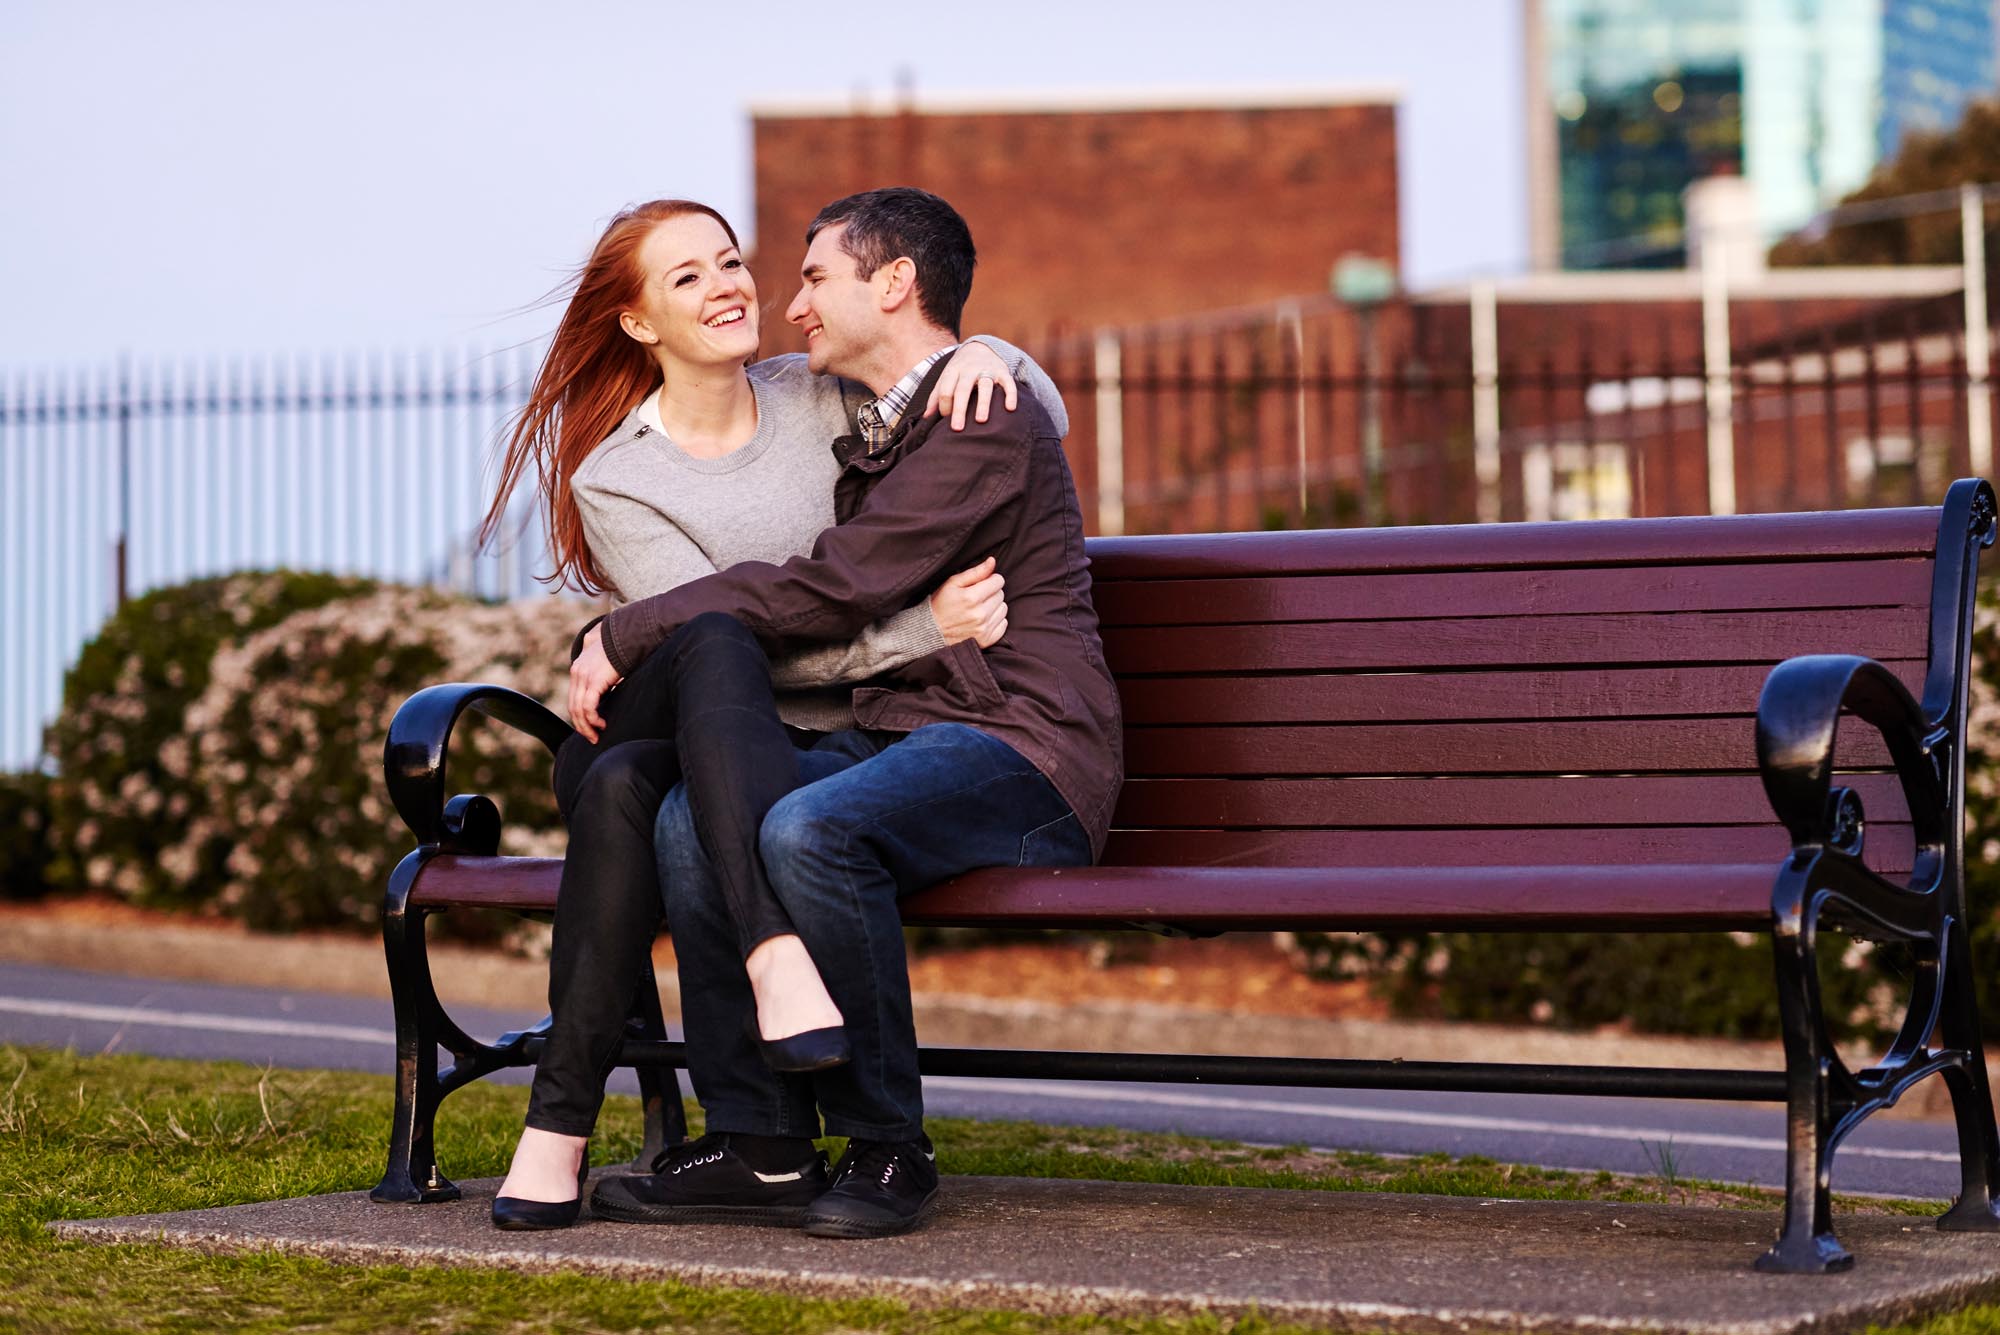 Noah and Beth embrace on a park bench